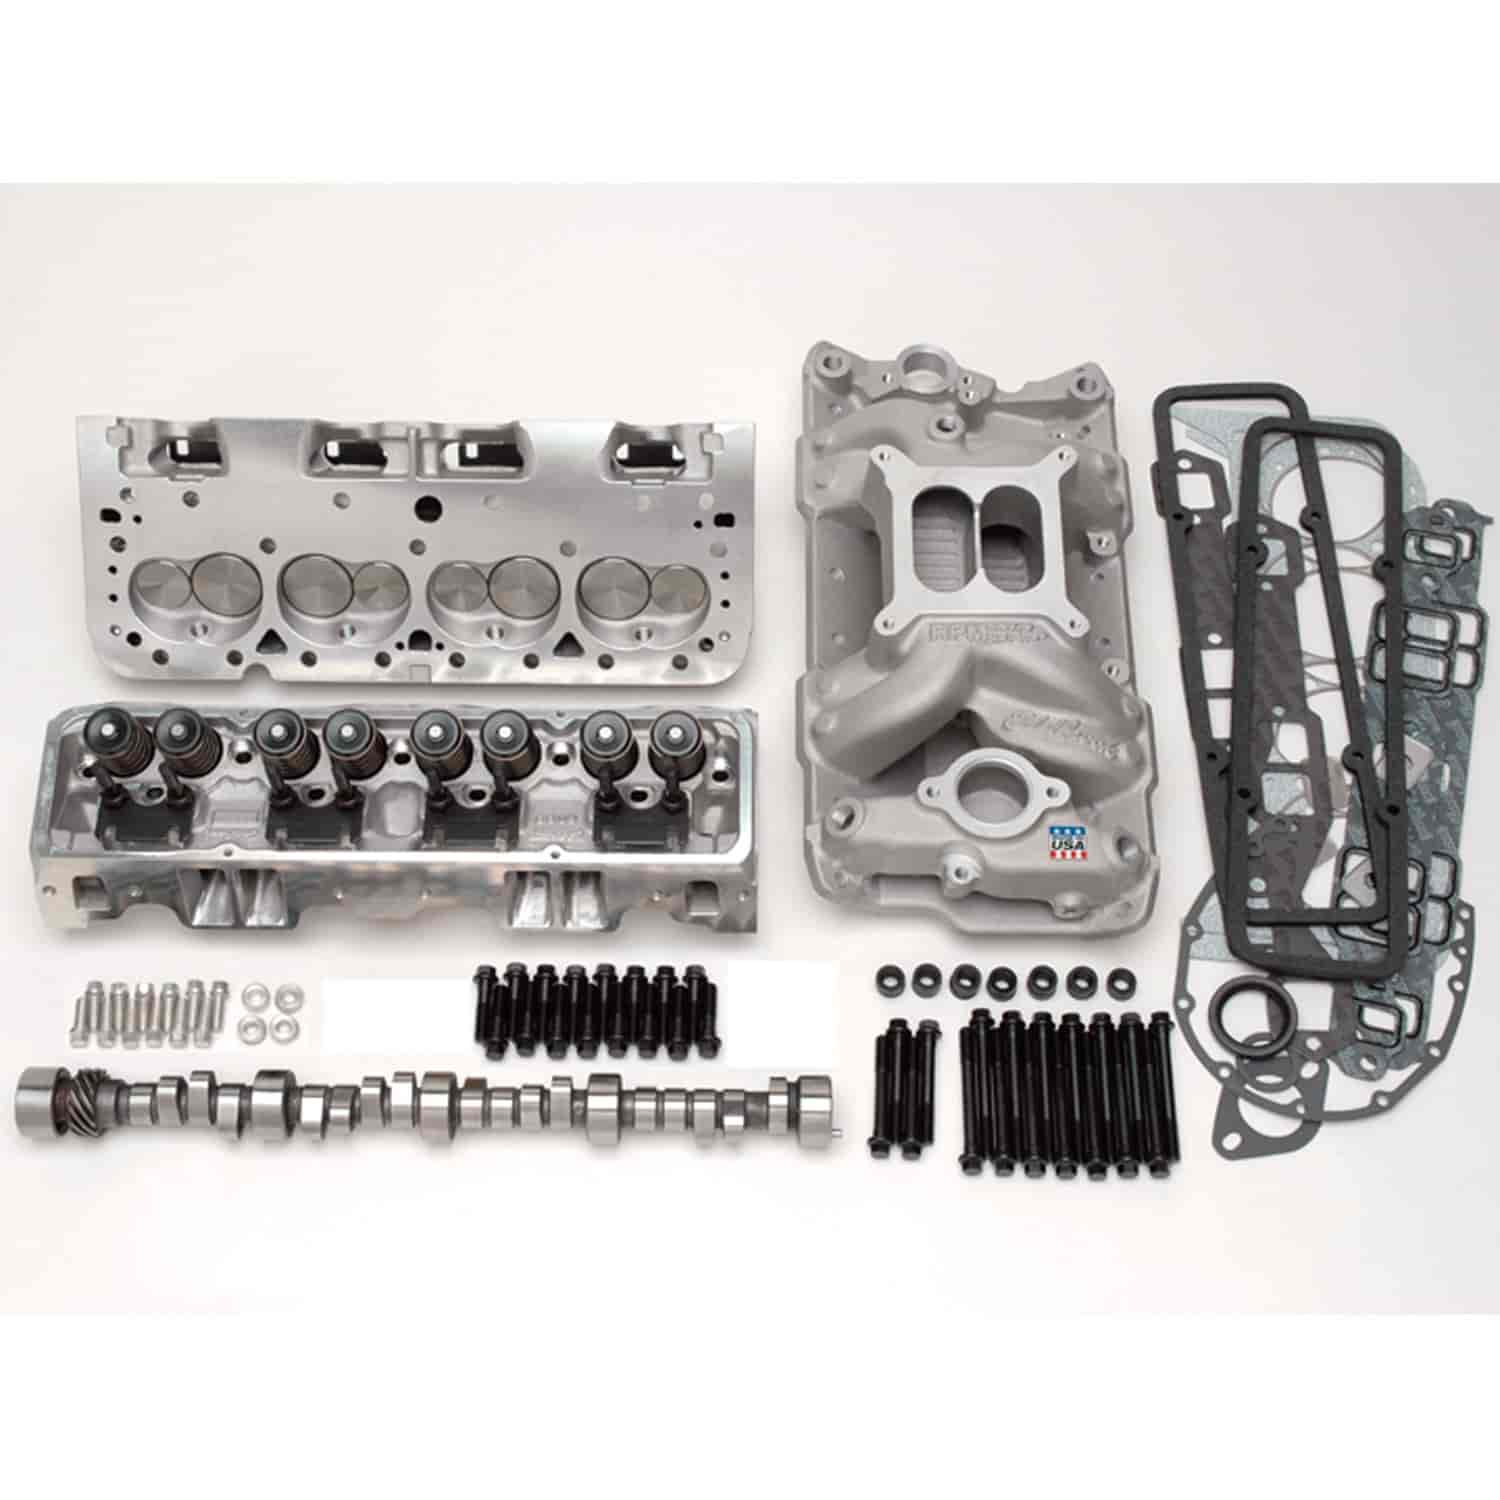 RPM Power Package Kit for 1957-1986 Small Block Chevy 383-427